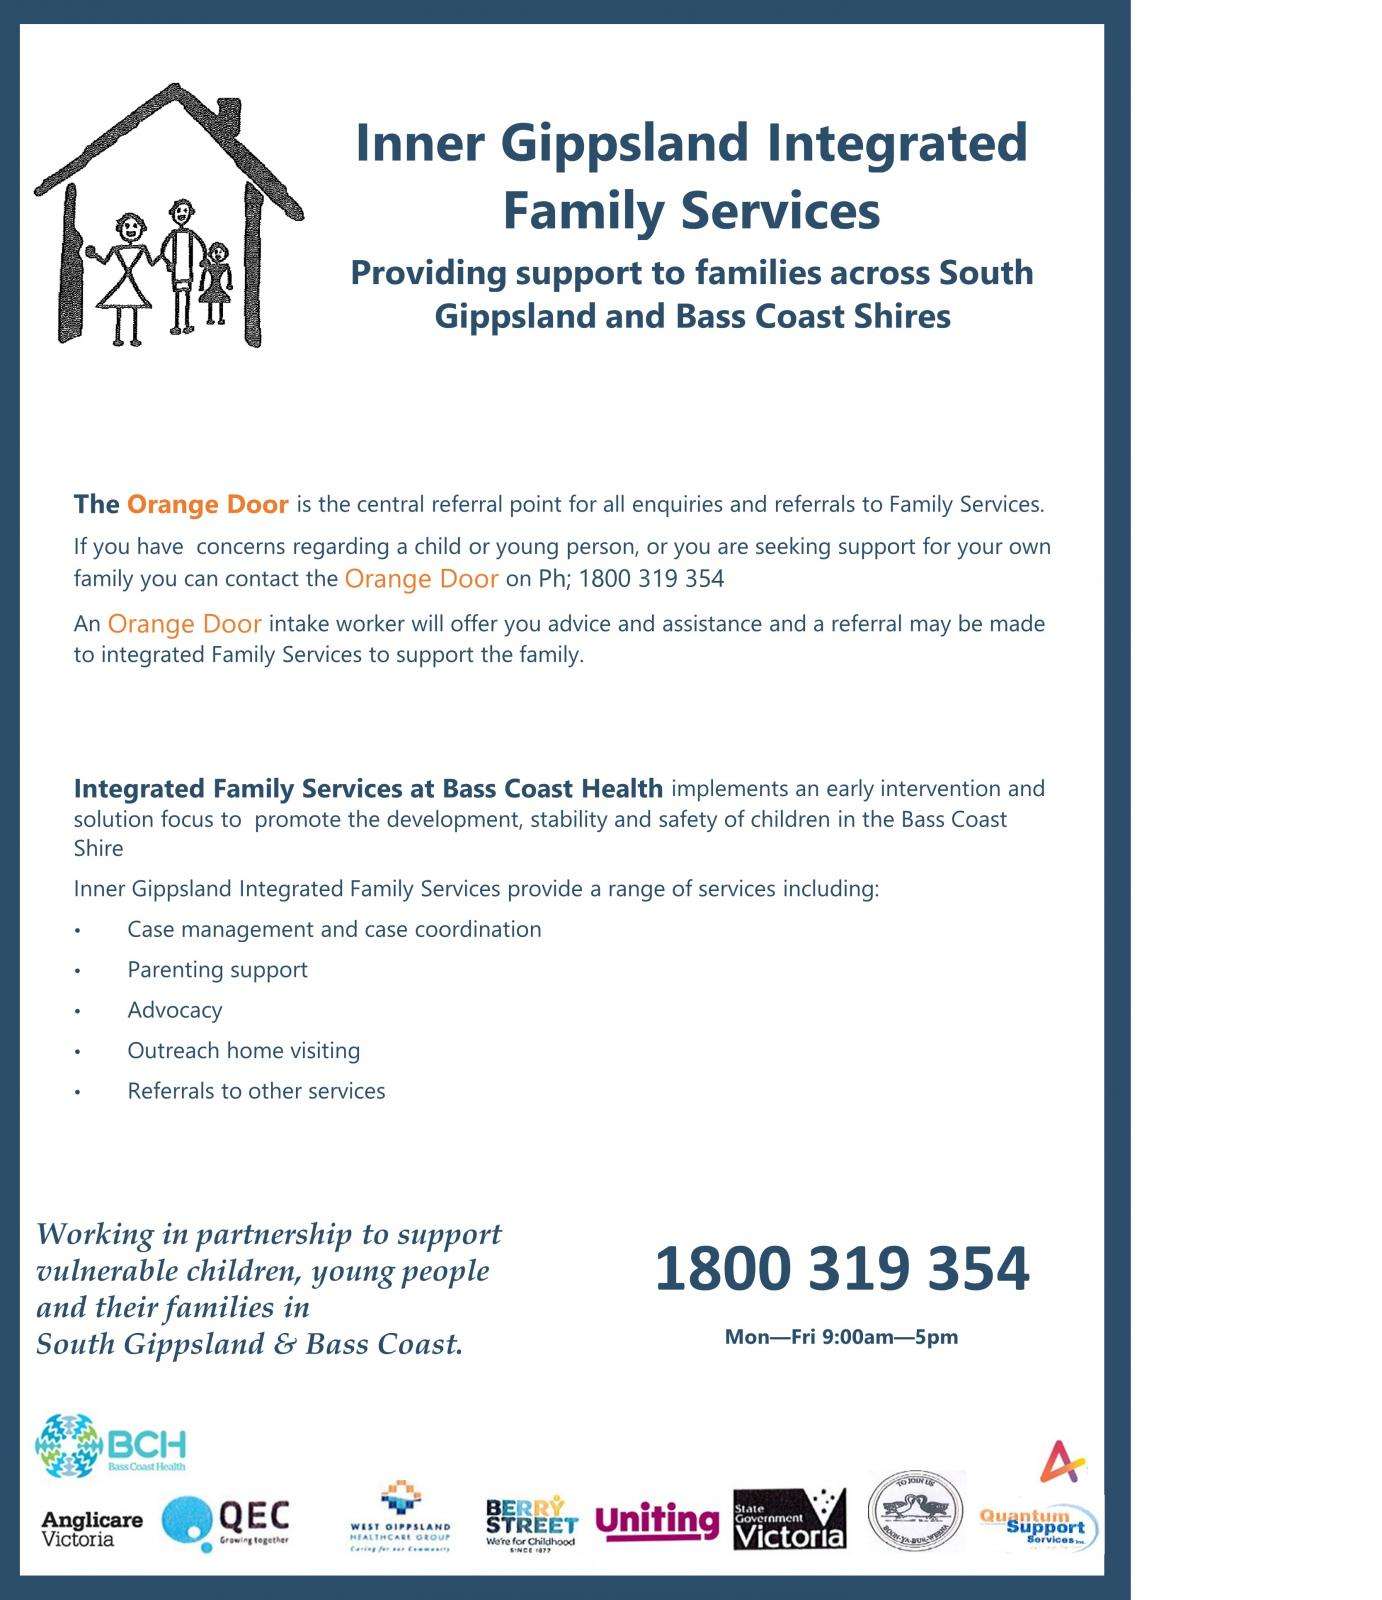 Inner Gippsland Integrated Family Services